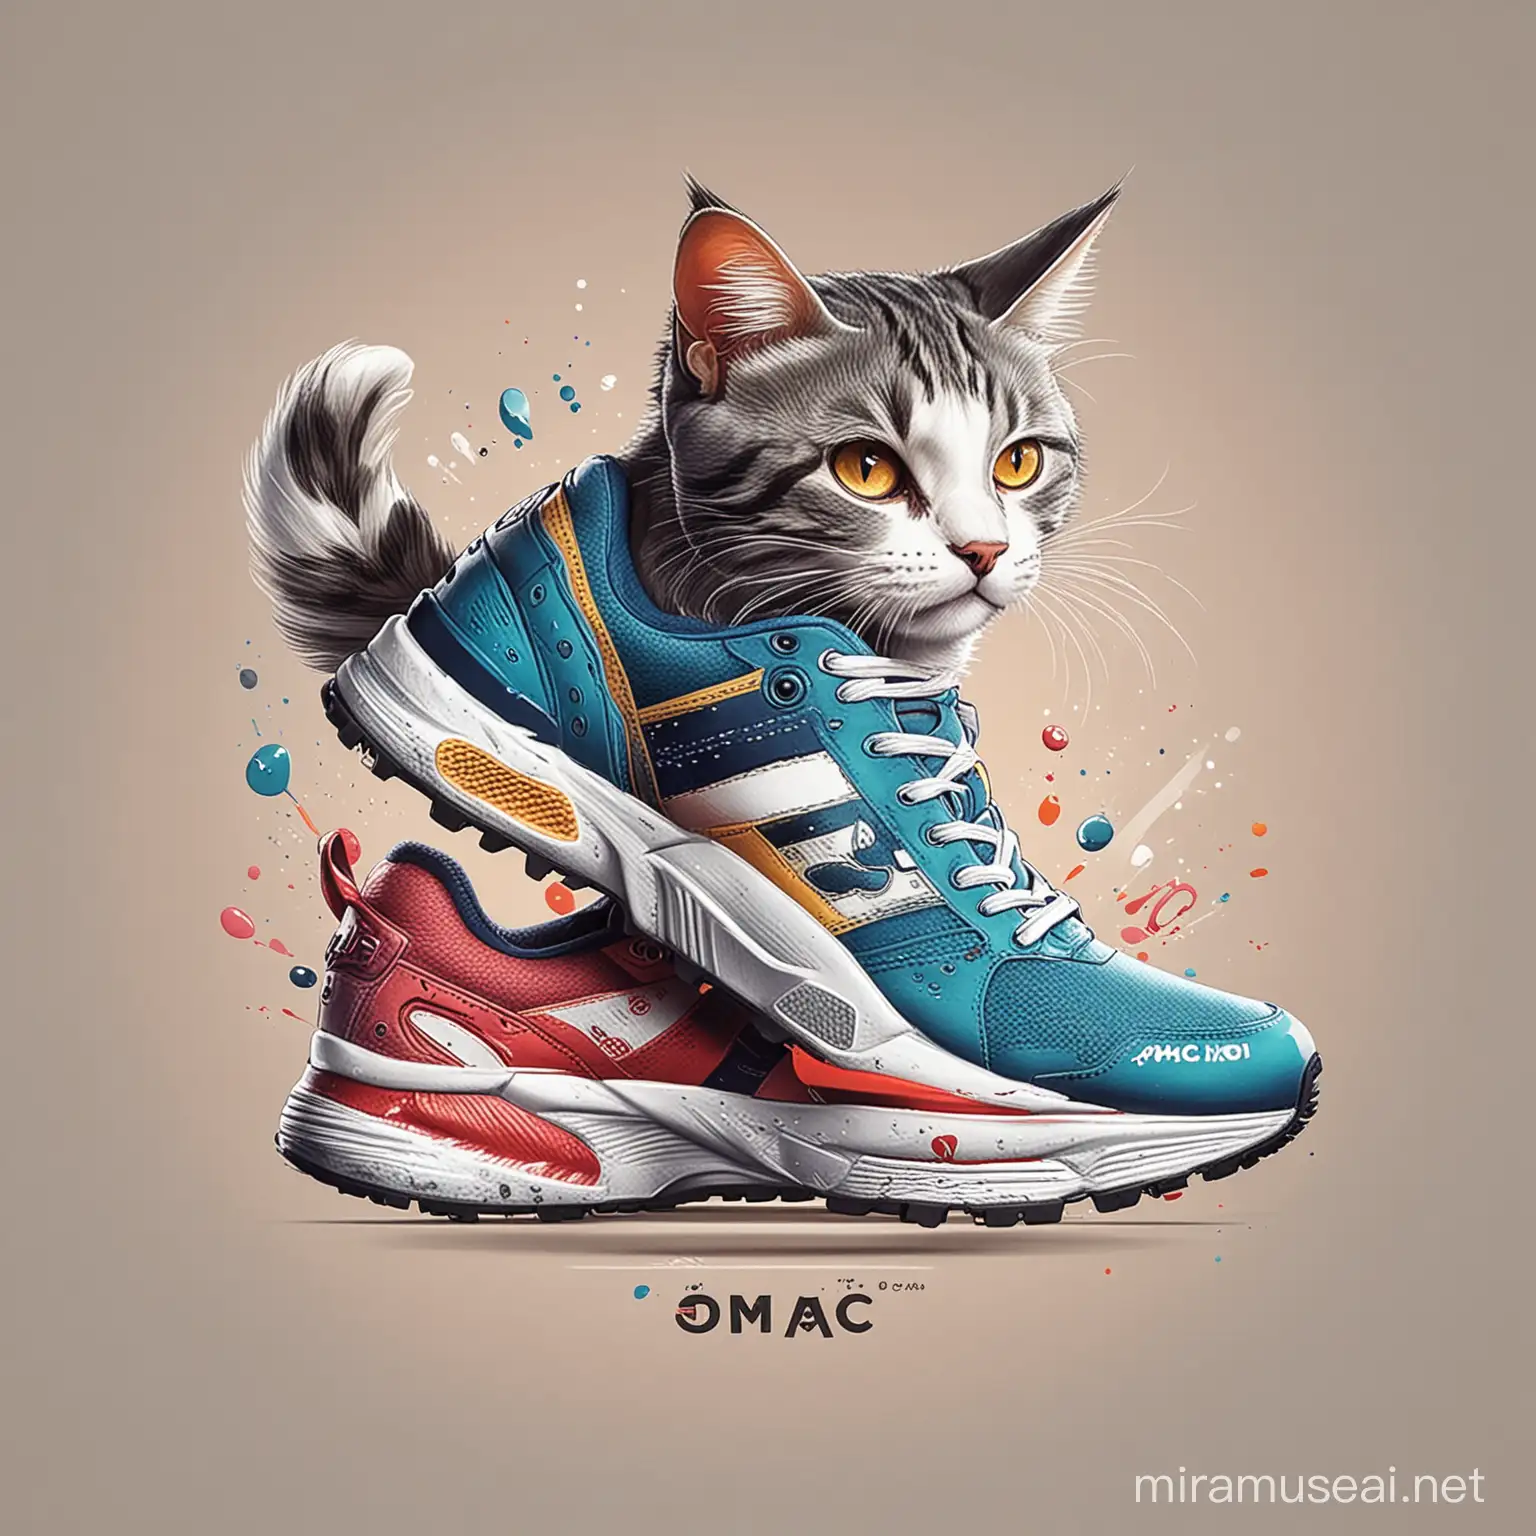 Colorful Vector Drawing of a Cat Wearing OMAC Running Shoes and Caps